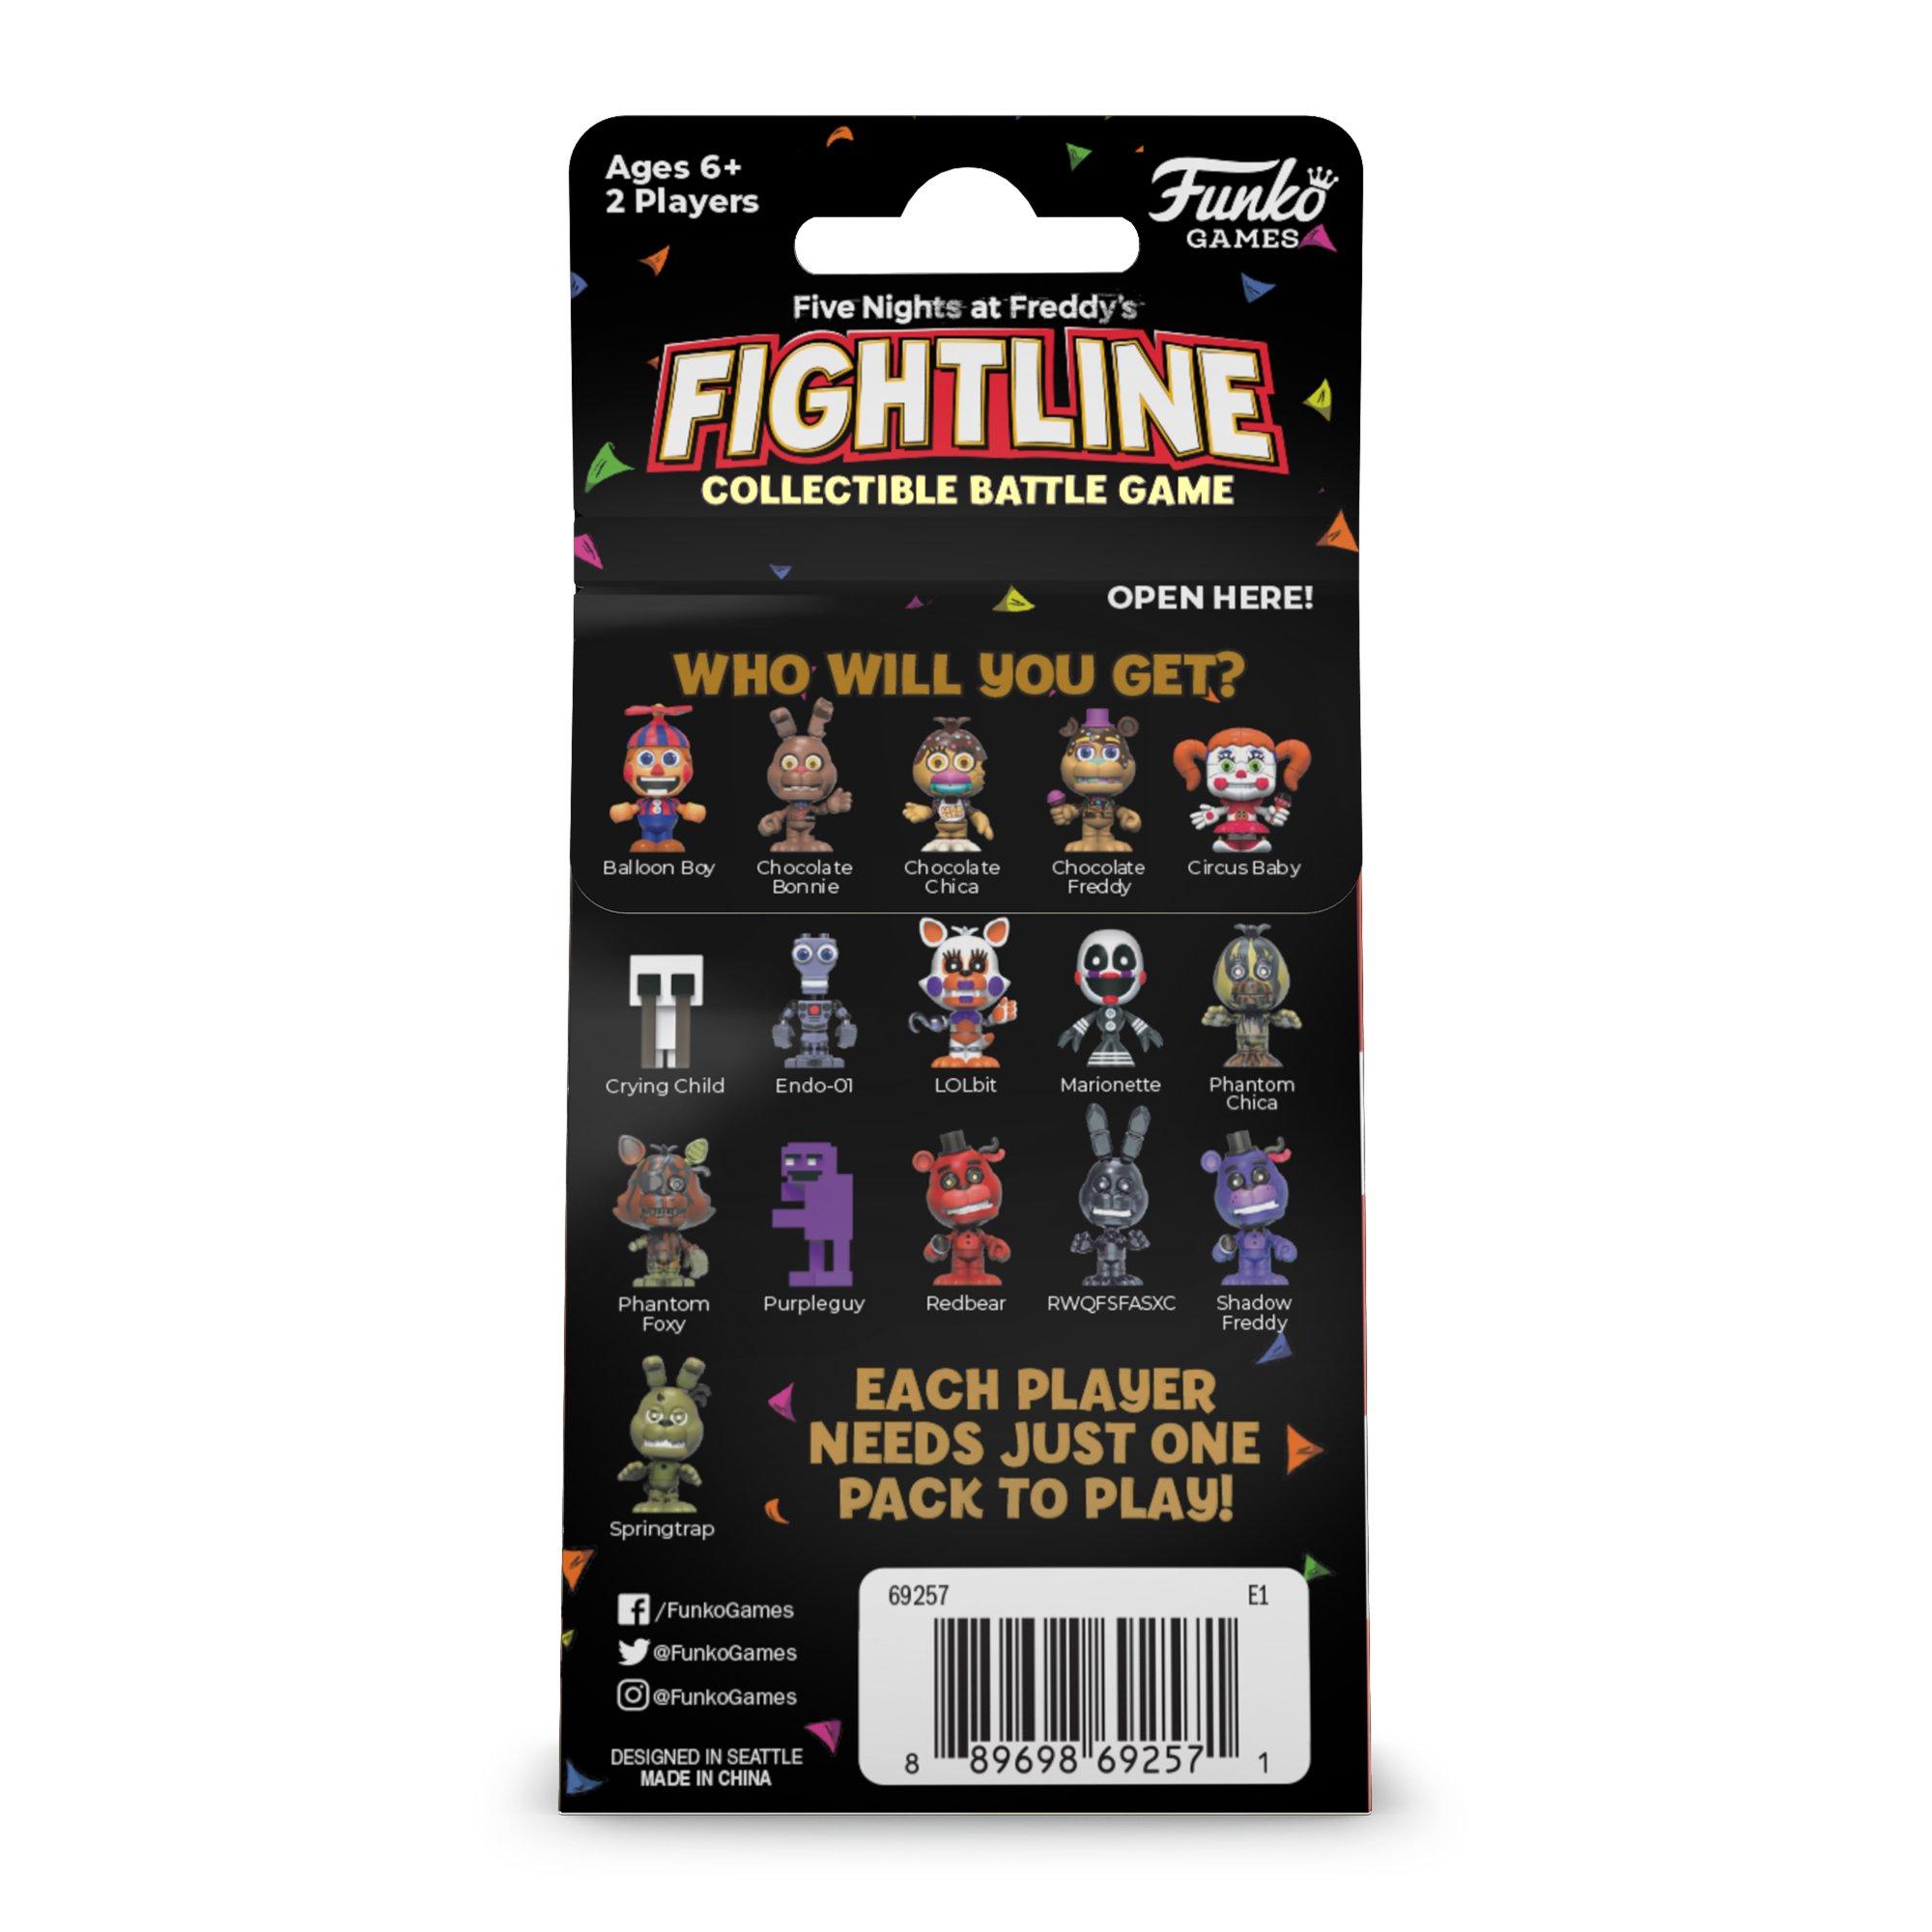 Funko Games Five Nights at Freddy's FightLine Collectible Battle Game Character Pack (Styles May Vary)